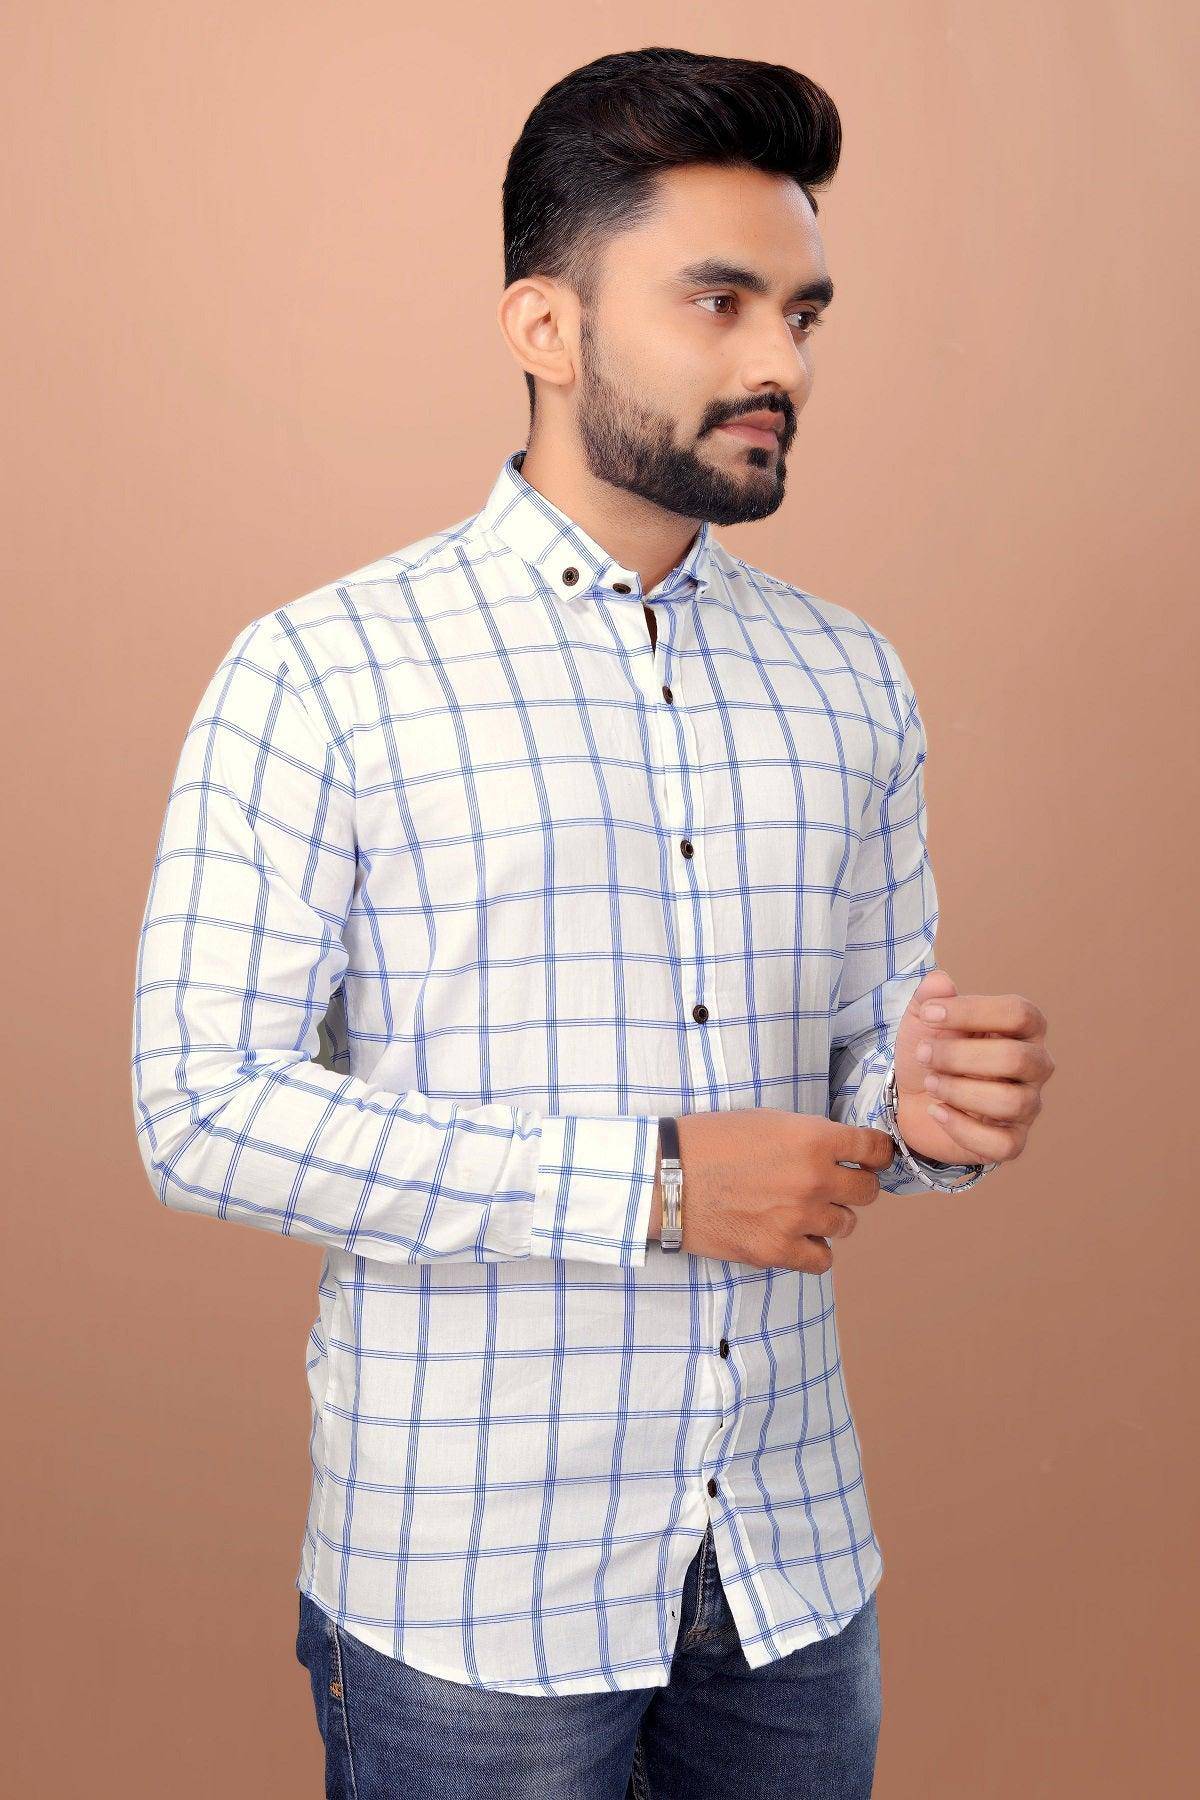 UD FABRIC Men Full Sleeve Cotton Casual Check Shirts - White - UD FABRIC - Your Style our Design